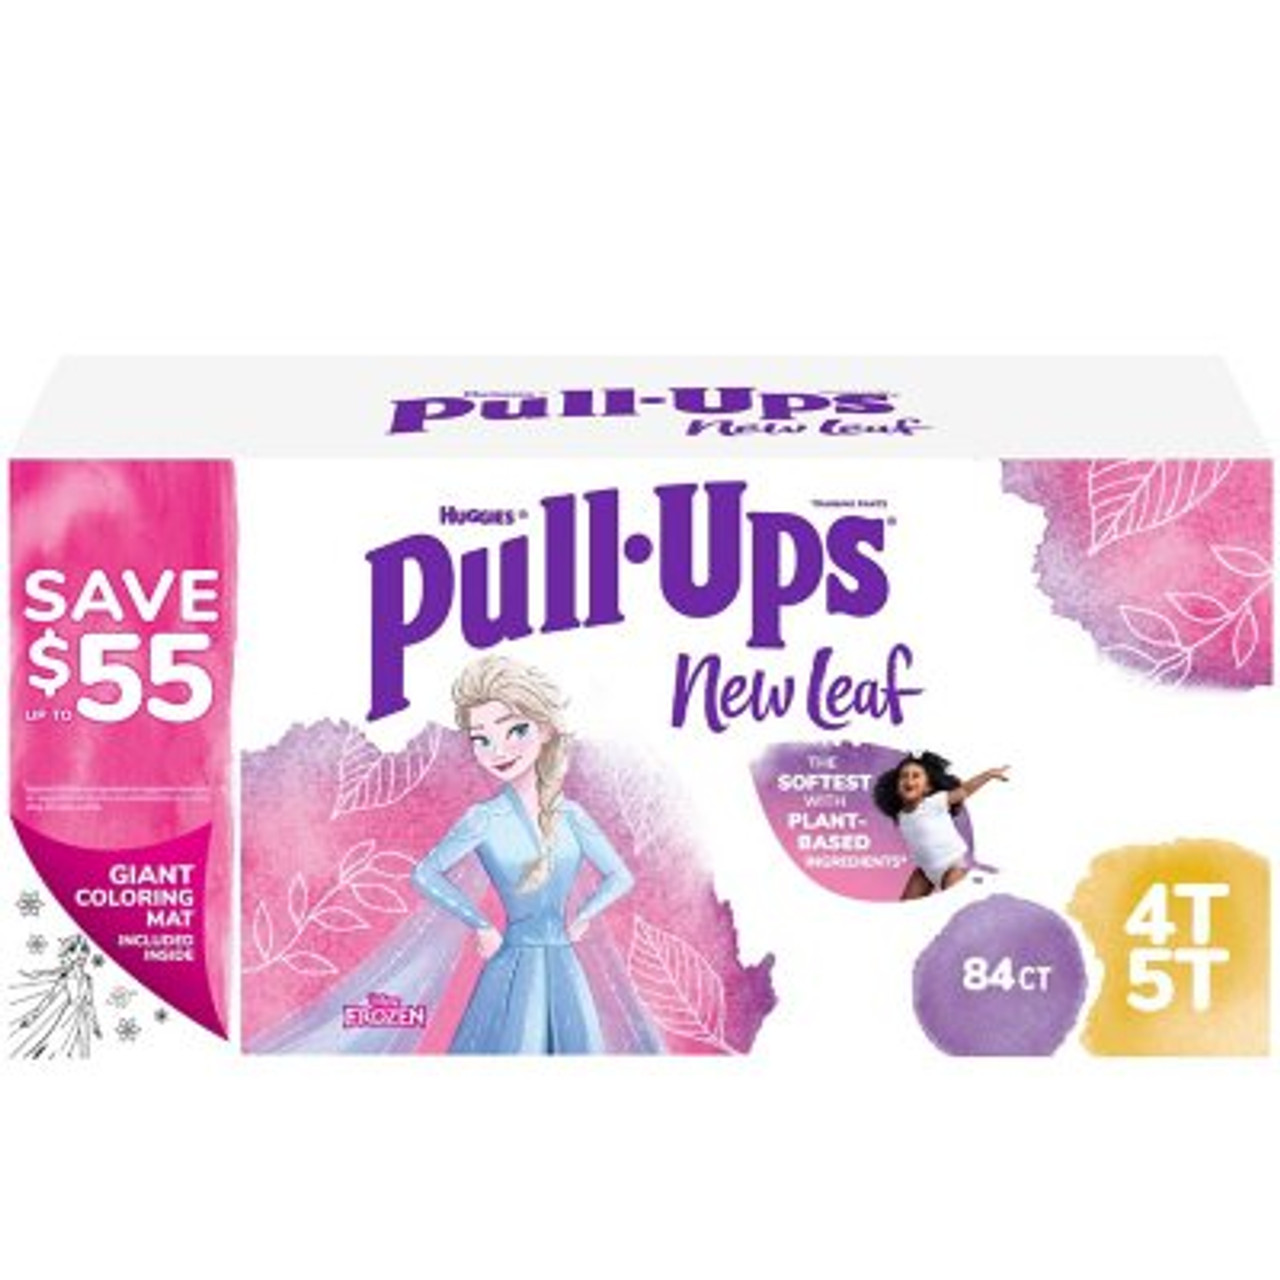 Huggies Pull-Ups New Leaf Training Underwear for Girls 4T-5T - 84 ct. (38-50 lbs) - *Pre-Order